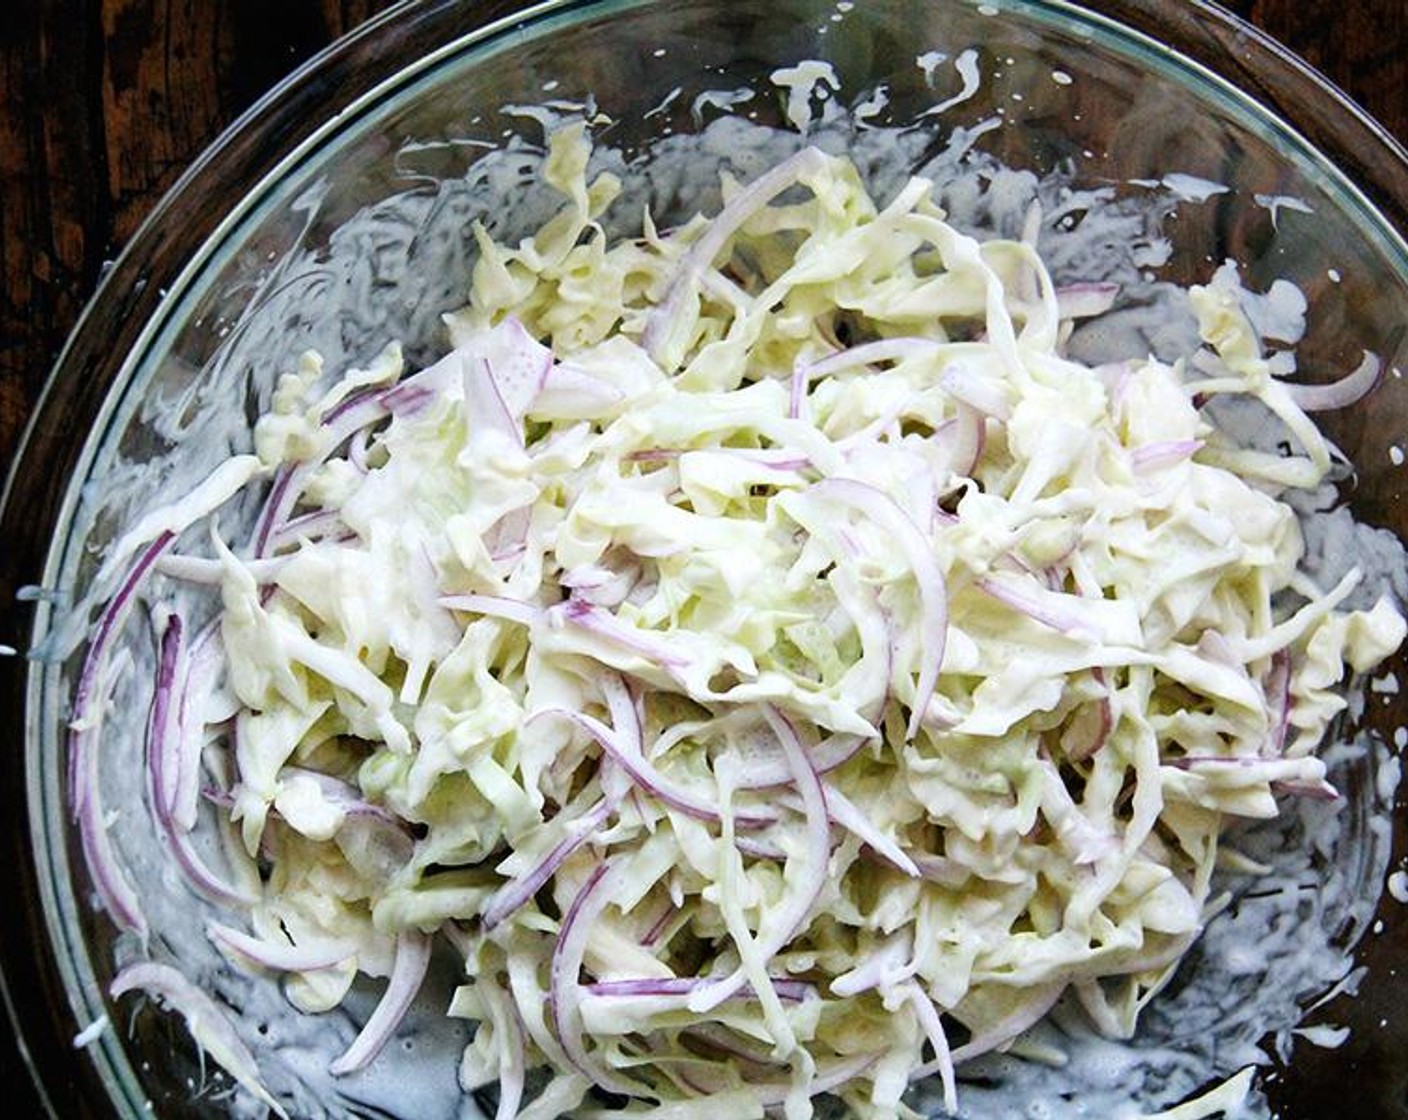 step 2 In a large bowl, toss together the Green Cabbage (1 head) and Red Onion (1). Add the dressing and toss to coat. Taste. Adjust with more salt if necessary.